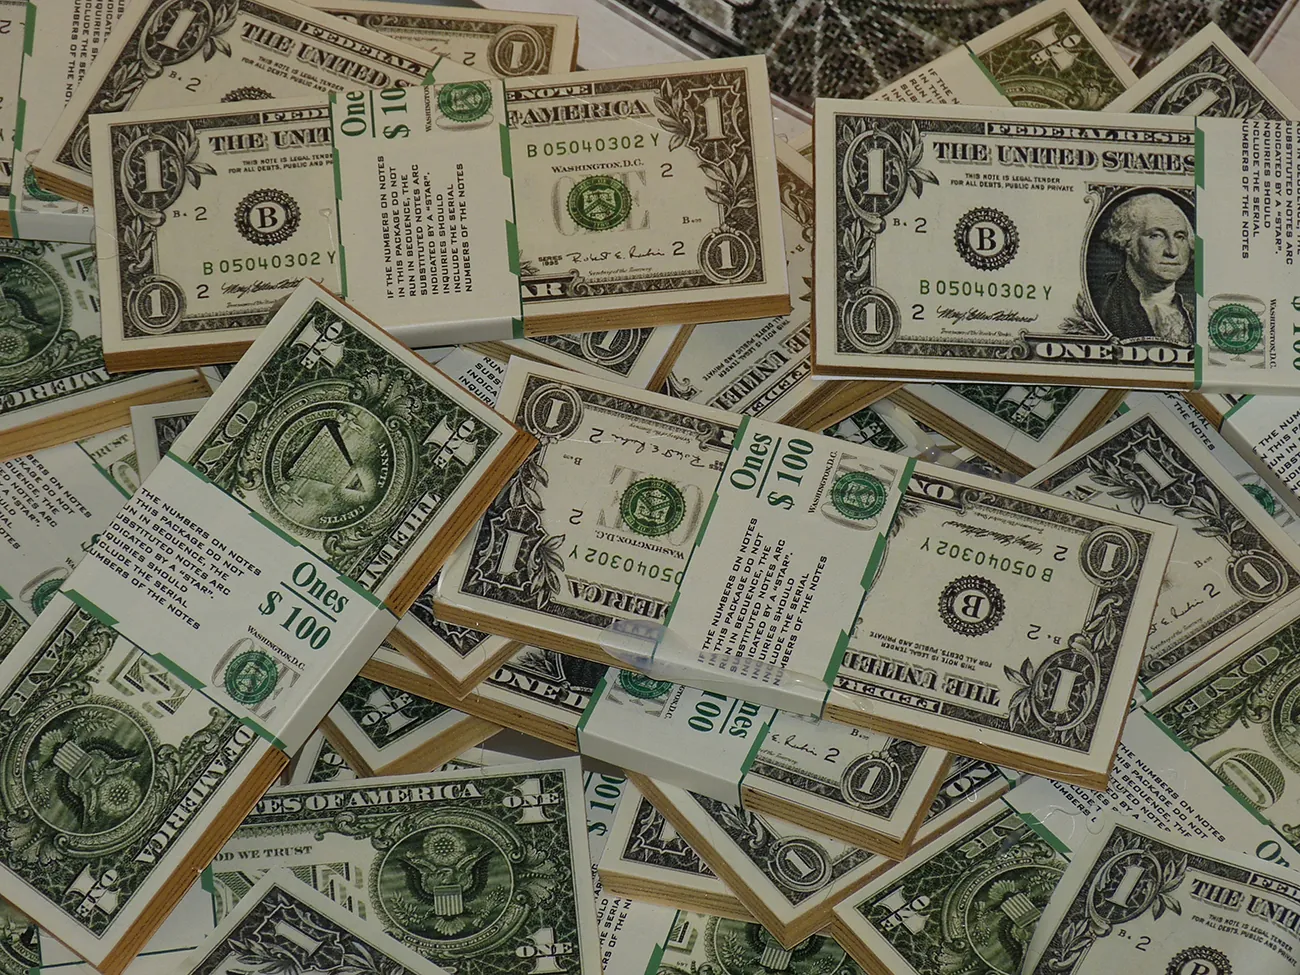 A photo shows dollar bills bundled and wrapped in $100 dollar amounts.